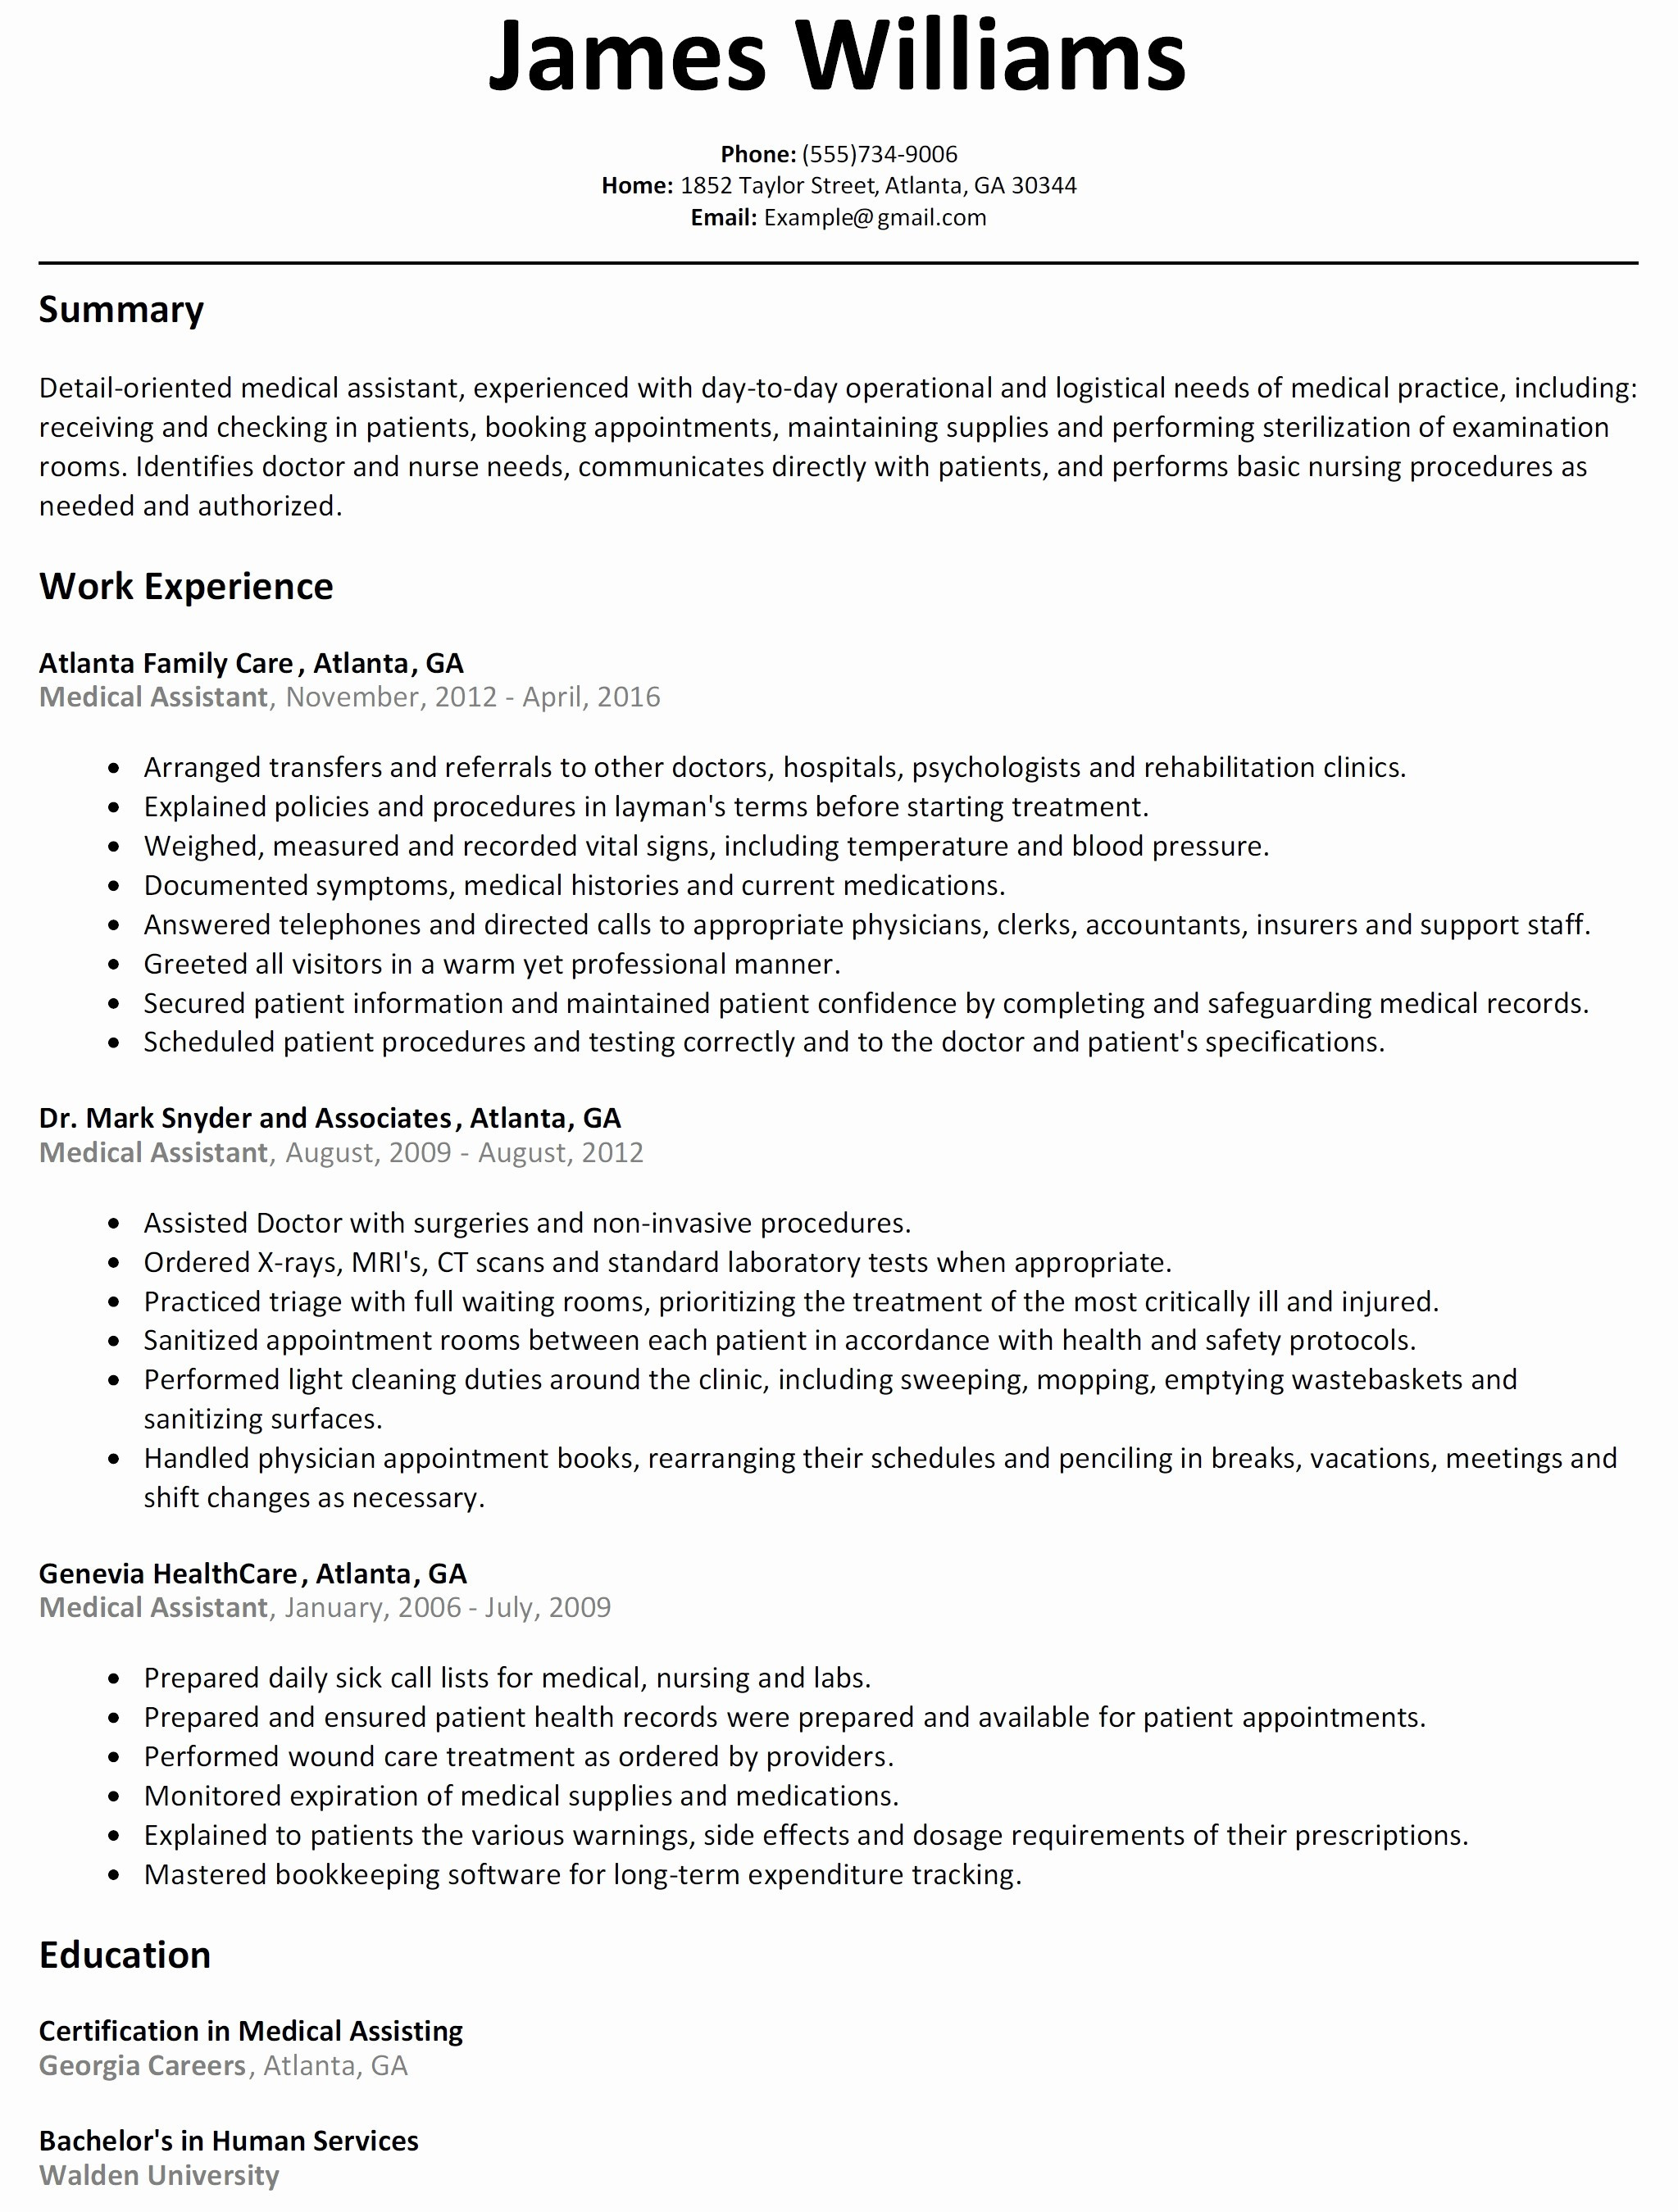 Examples Of Objectives For Resumes Objective For Resume Call Center In Agent With Experiencejectives No Example Supervisor examples of objectives for resumes|wikiresume.com